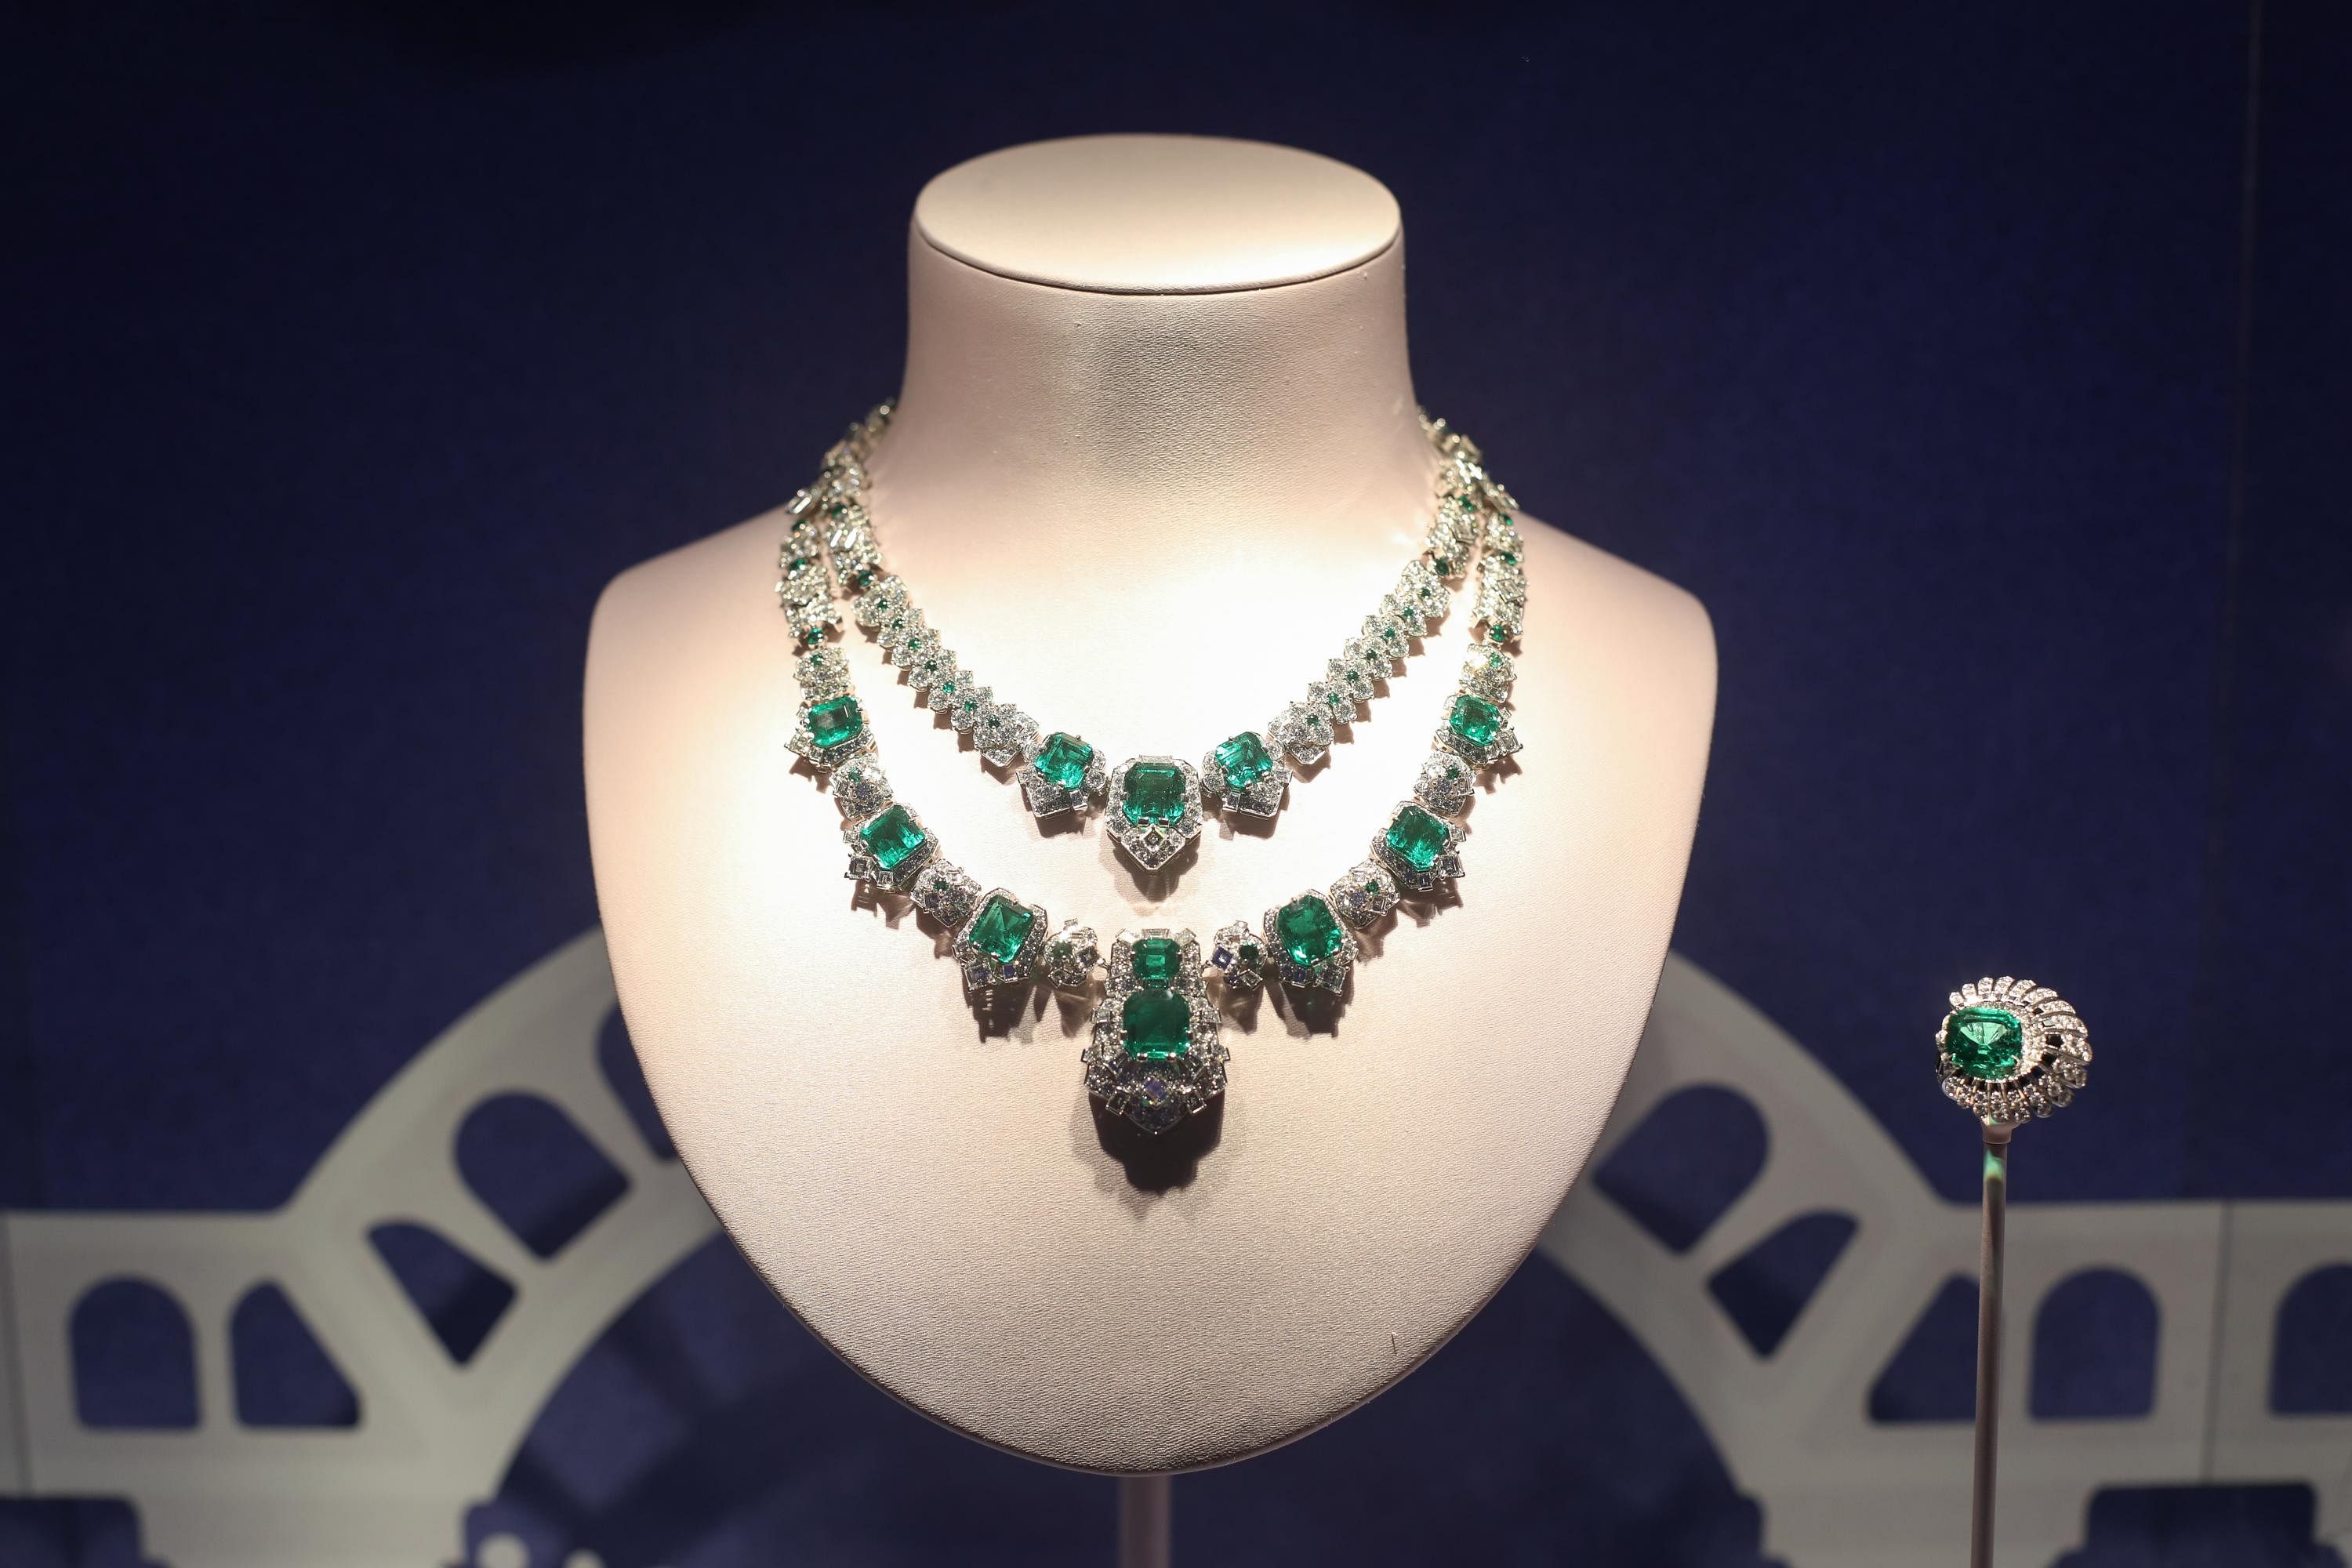 Van Cleef & Arpels' exhibition in S'pore all about shiny baubles and ...